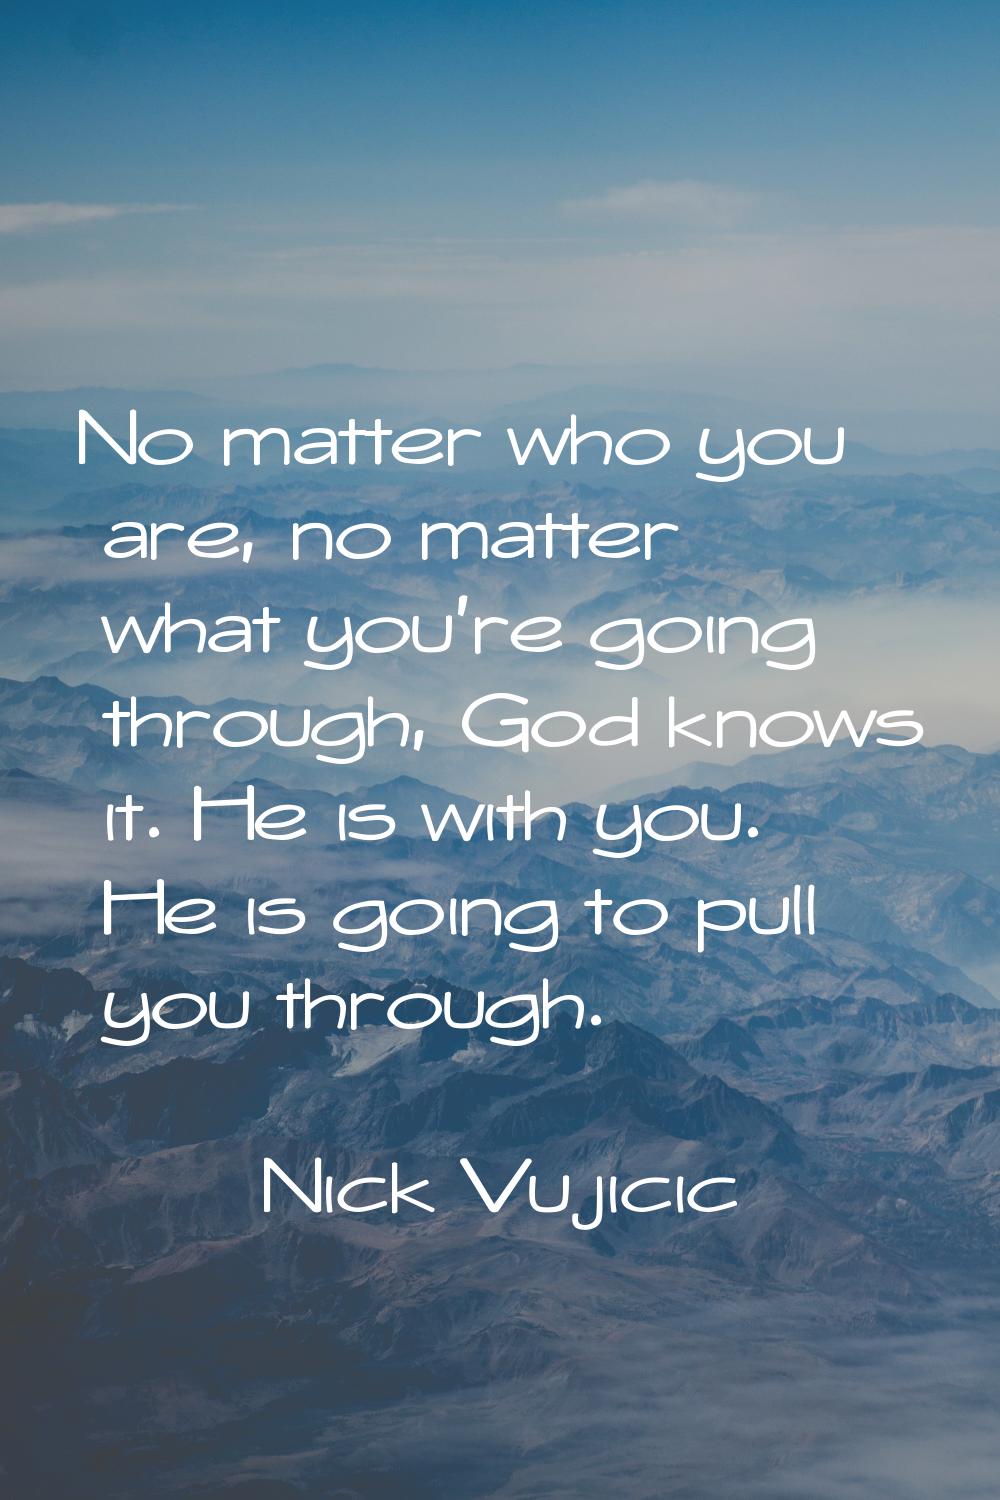 No matter who you are, no matter what you're going through, God knows it. He is with you. He is goi